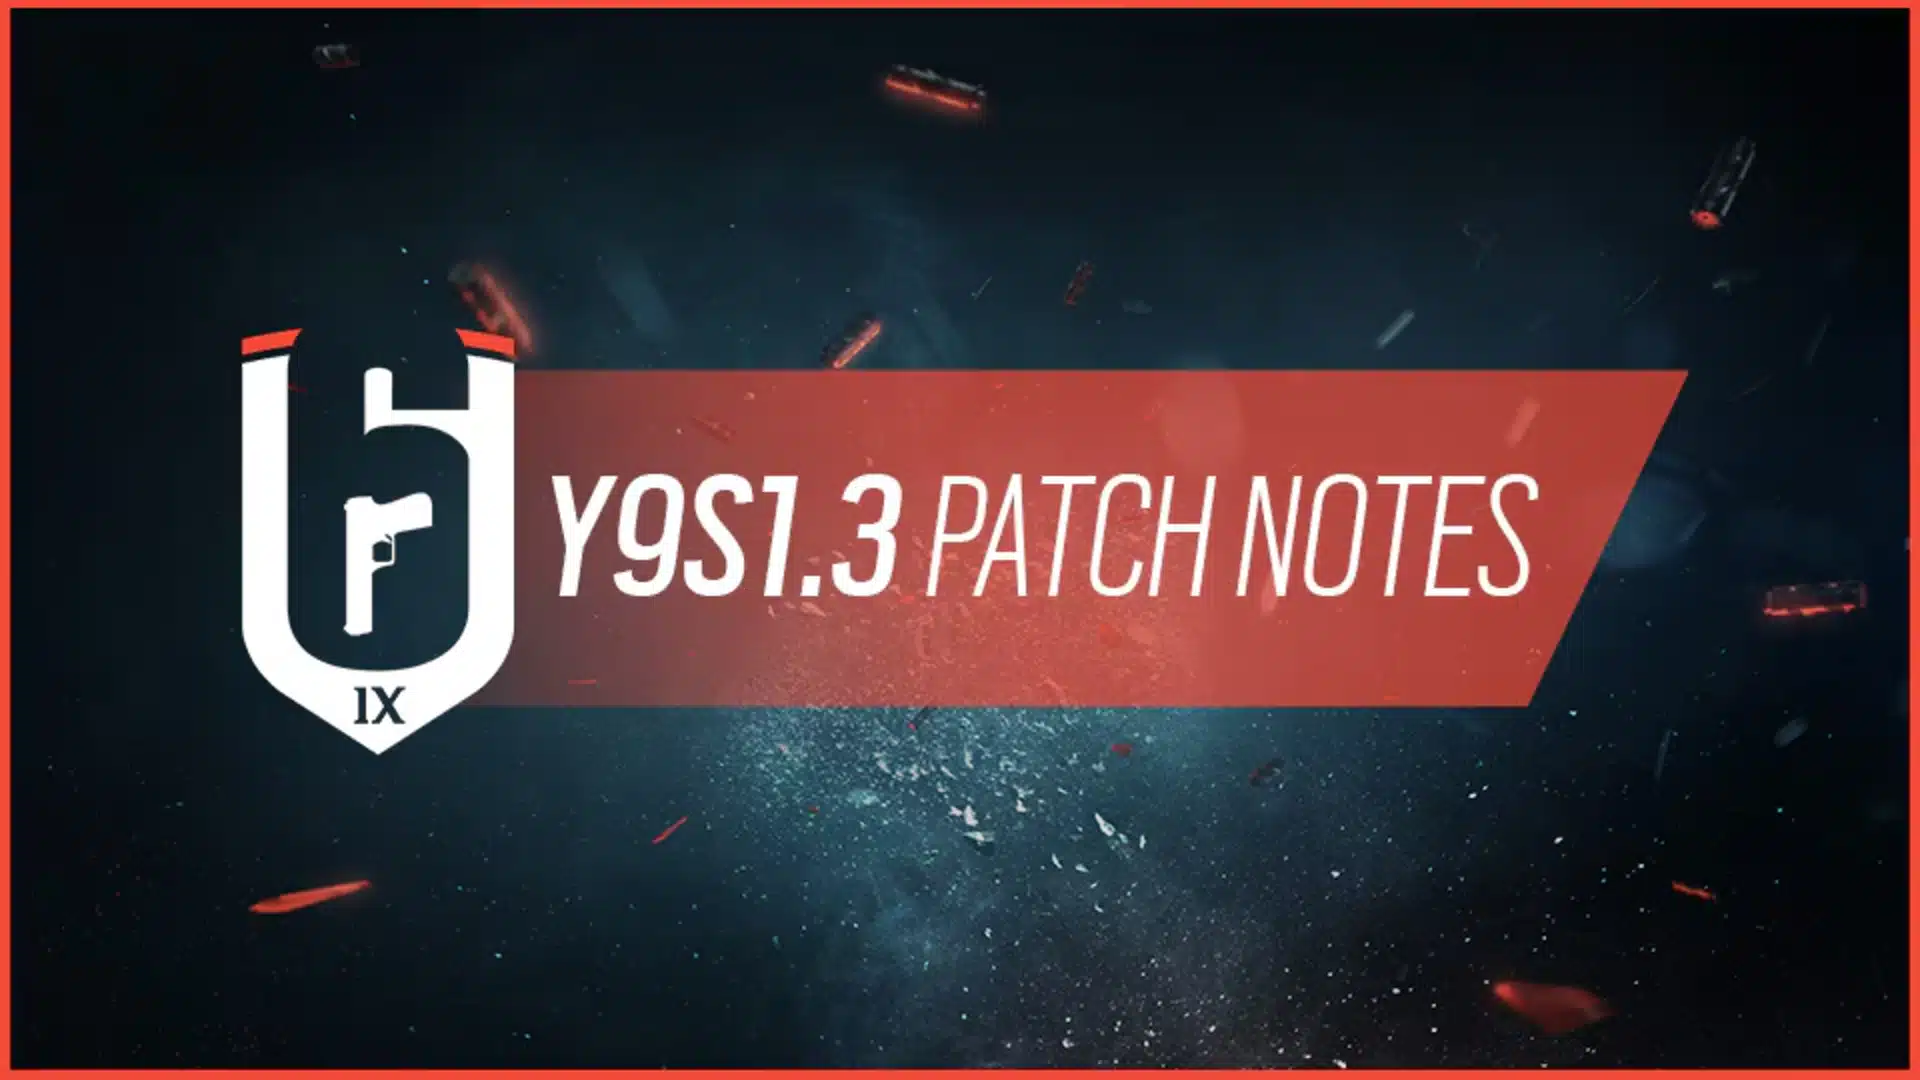 Rainbow Six Siege Update 2.74 Drops for Y9S1.3, Patch Notes Listed for May 2